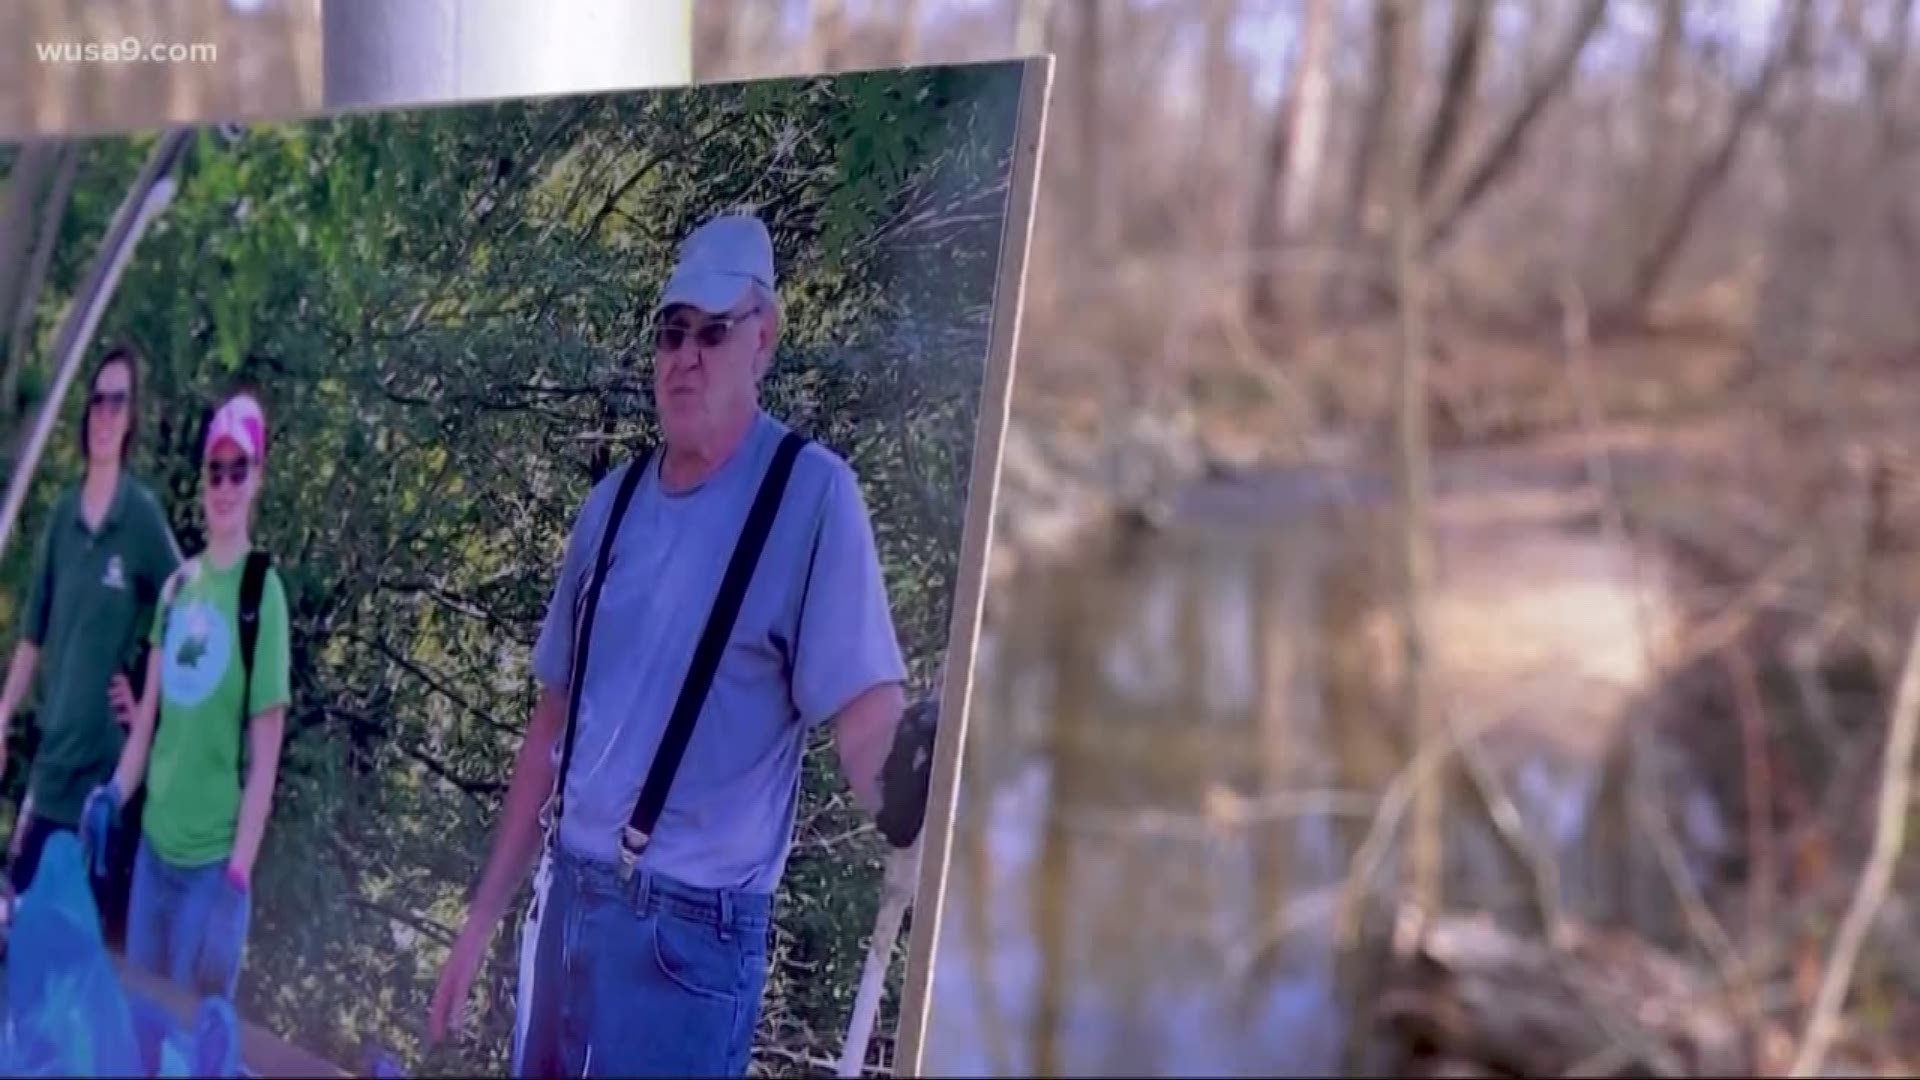 The community is remembering a man who kept a local park clean.